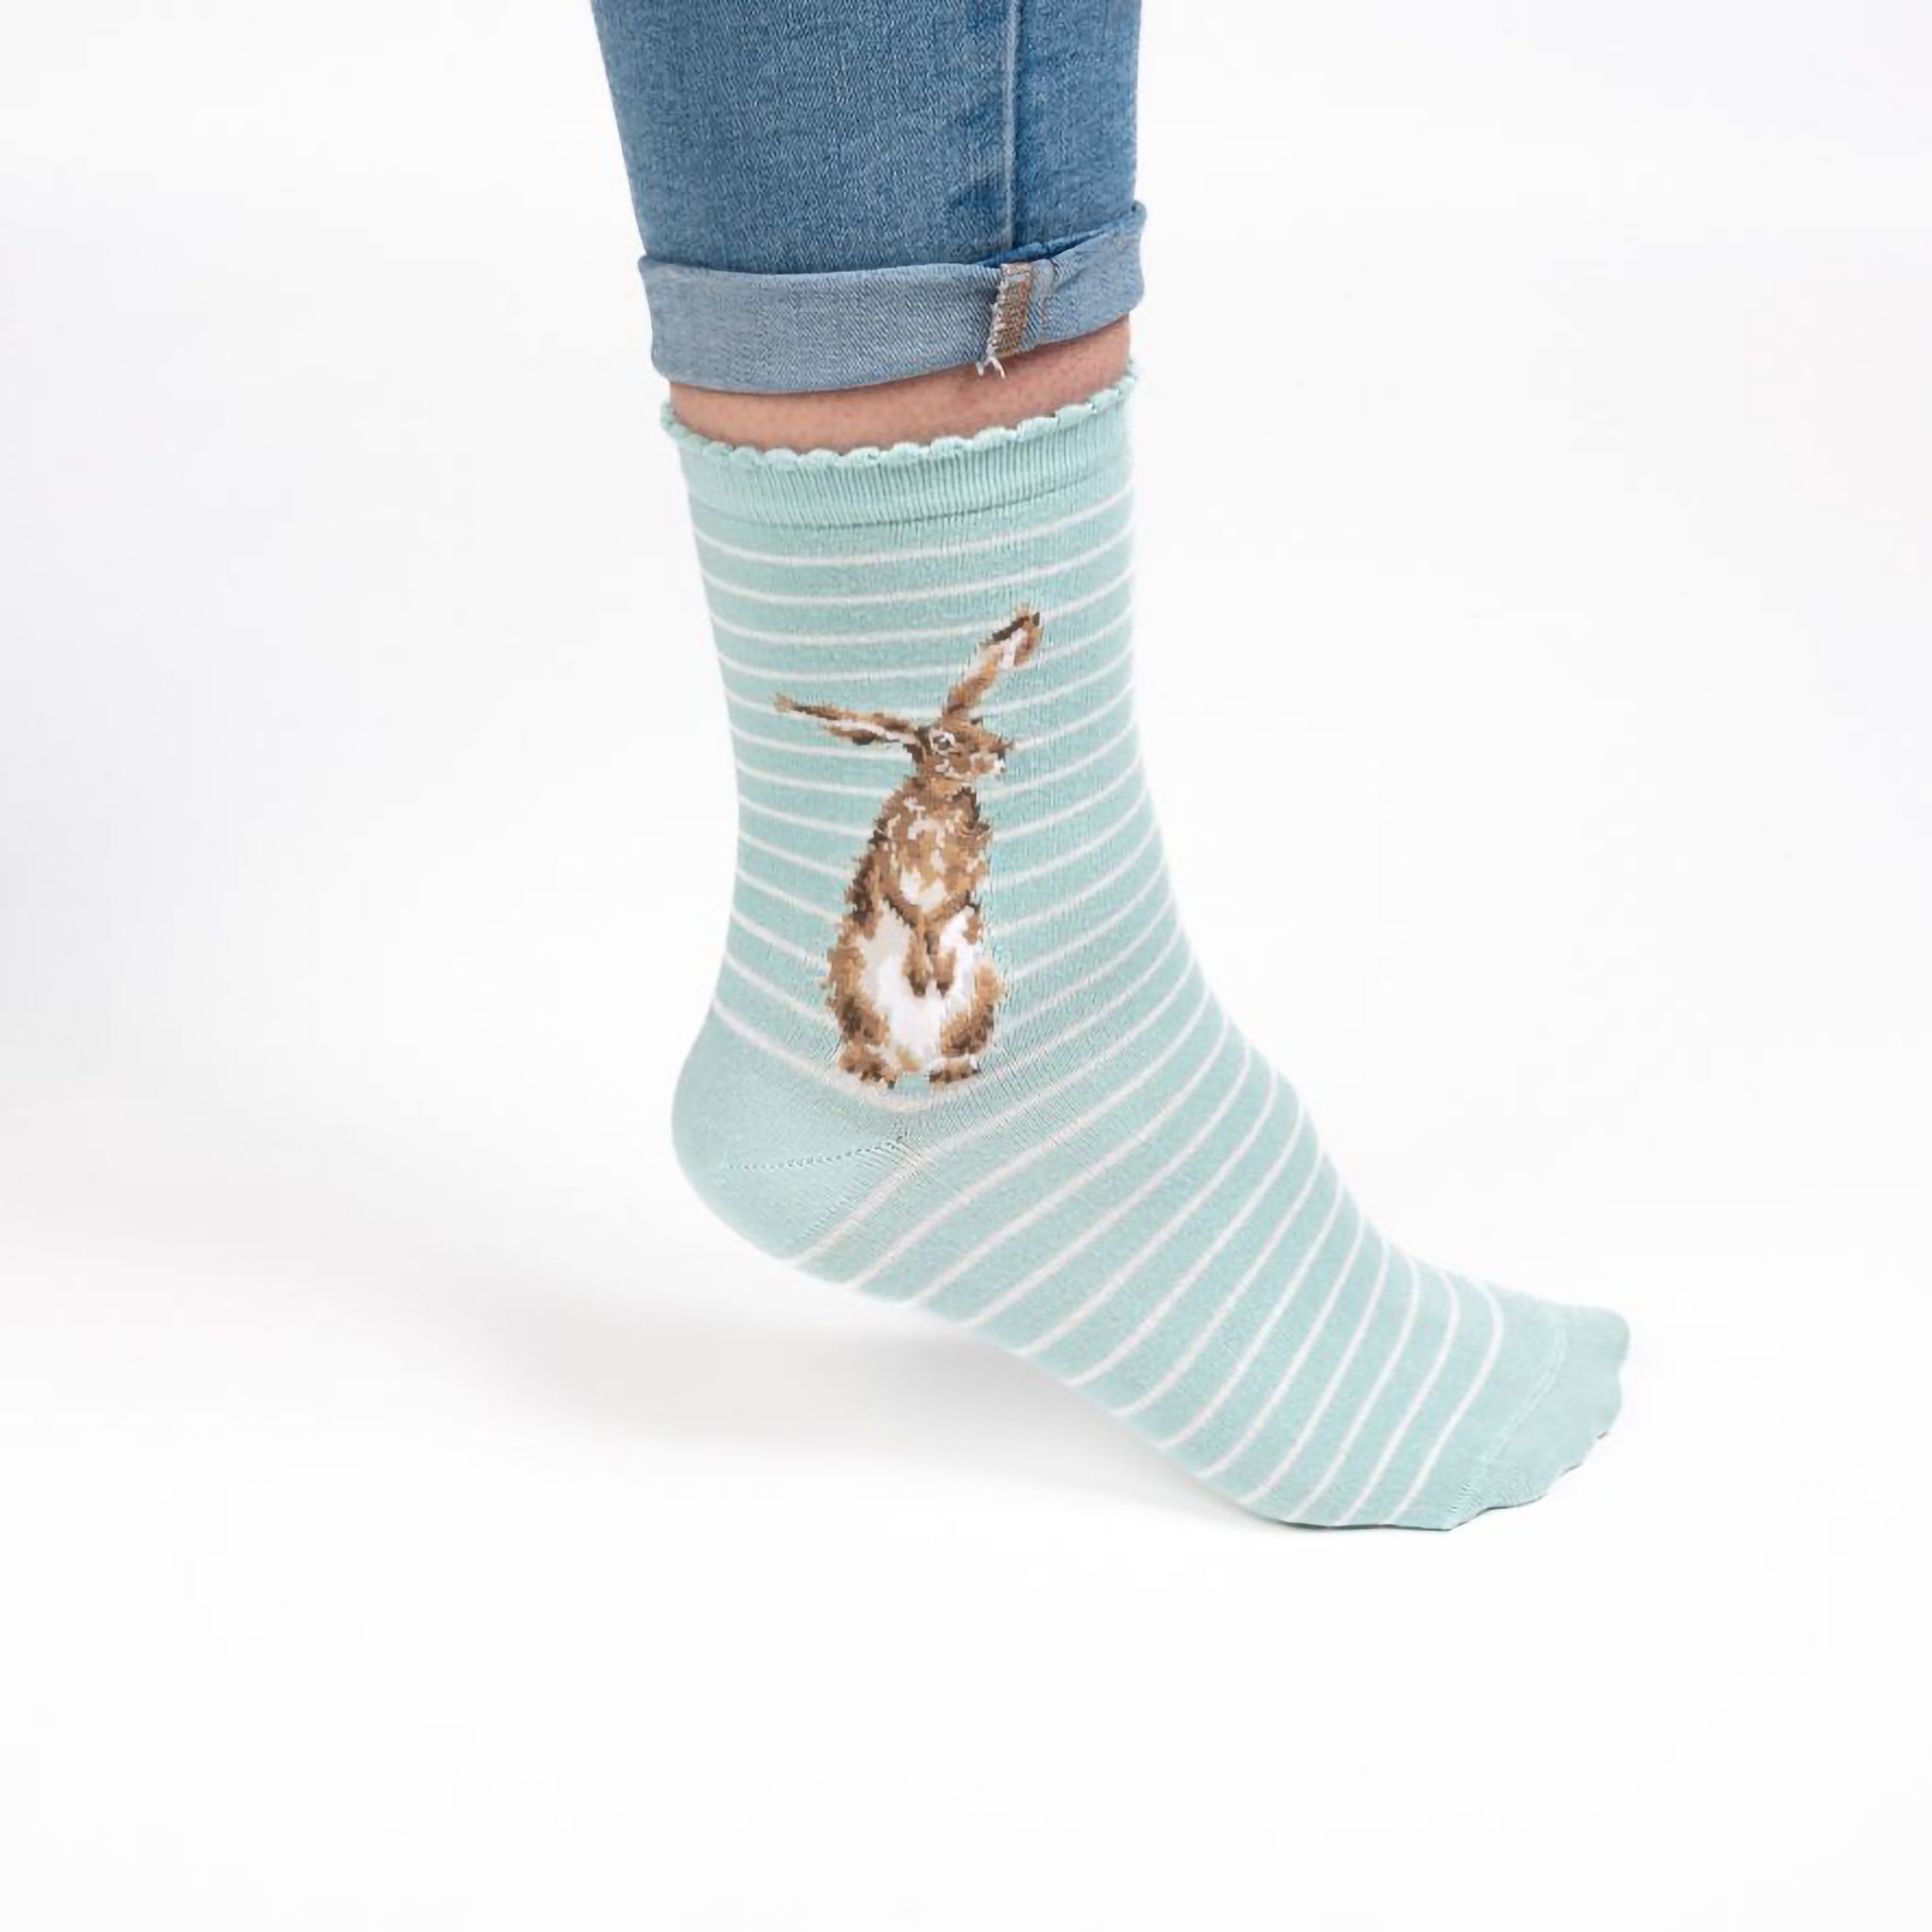 Model wearing a pair of light duck egg blue socks with a hare picture and white stripes